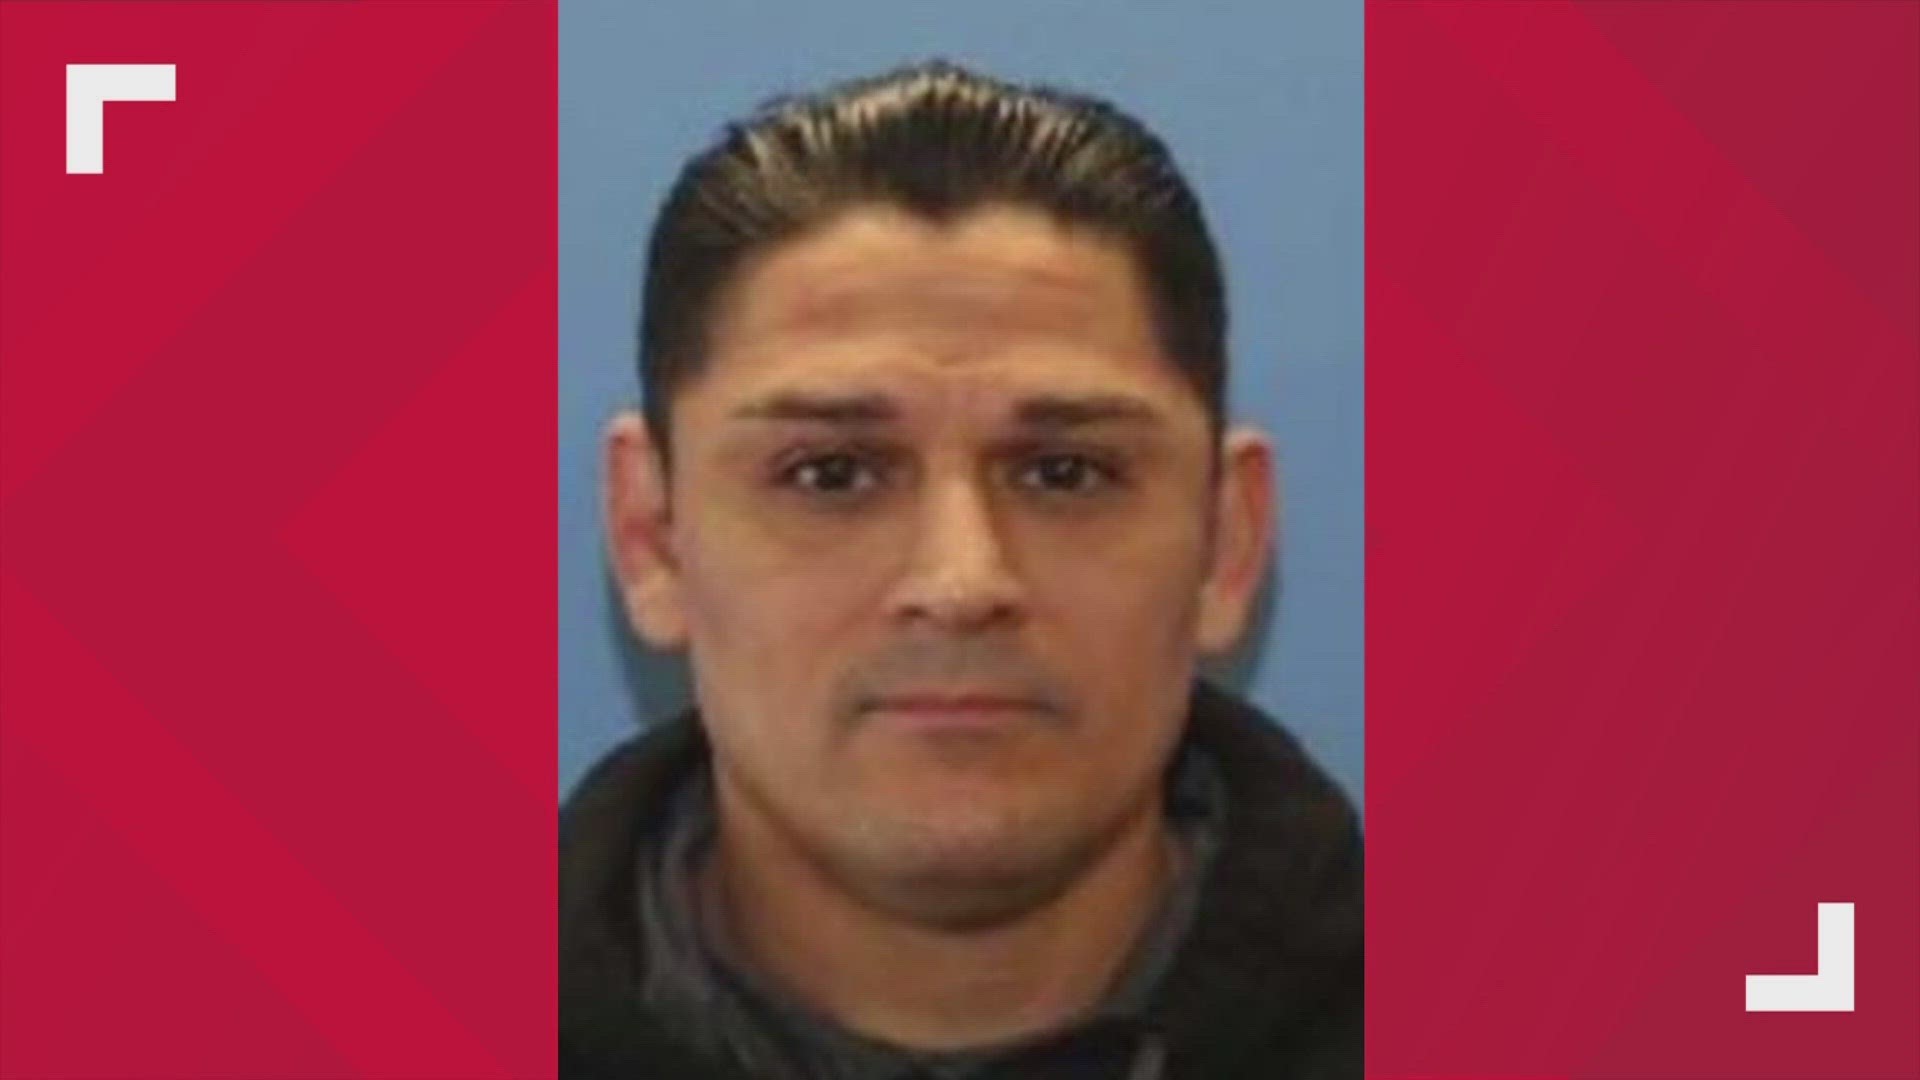 Police have identified the suspect as Elias Huizar. WSP said he is suspected of murdering his ex-wife and girlfriend and abducting his 1-year-old child.